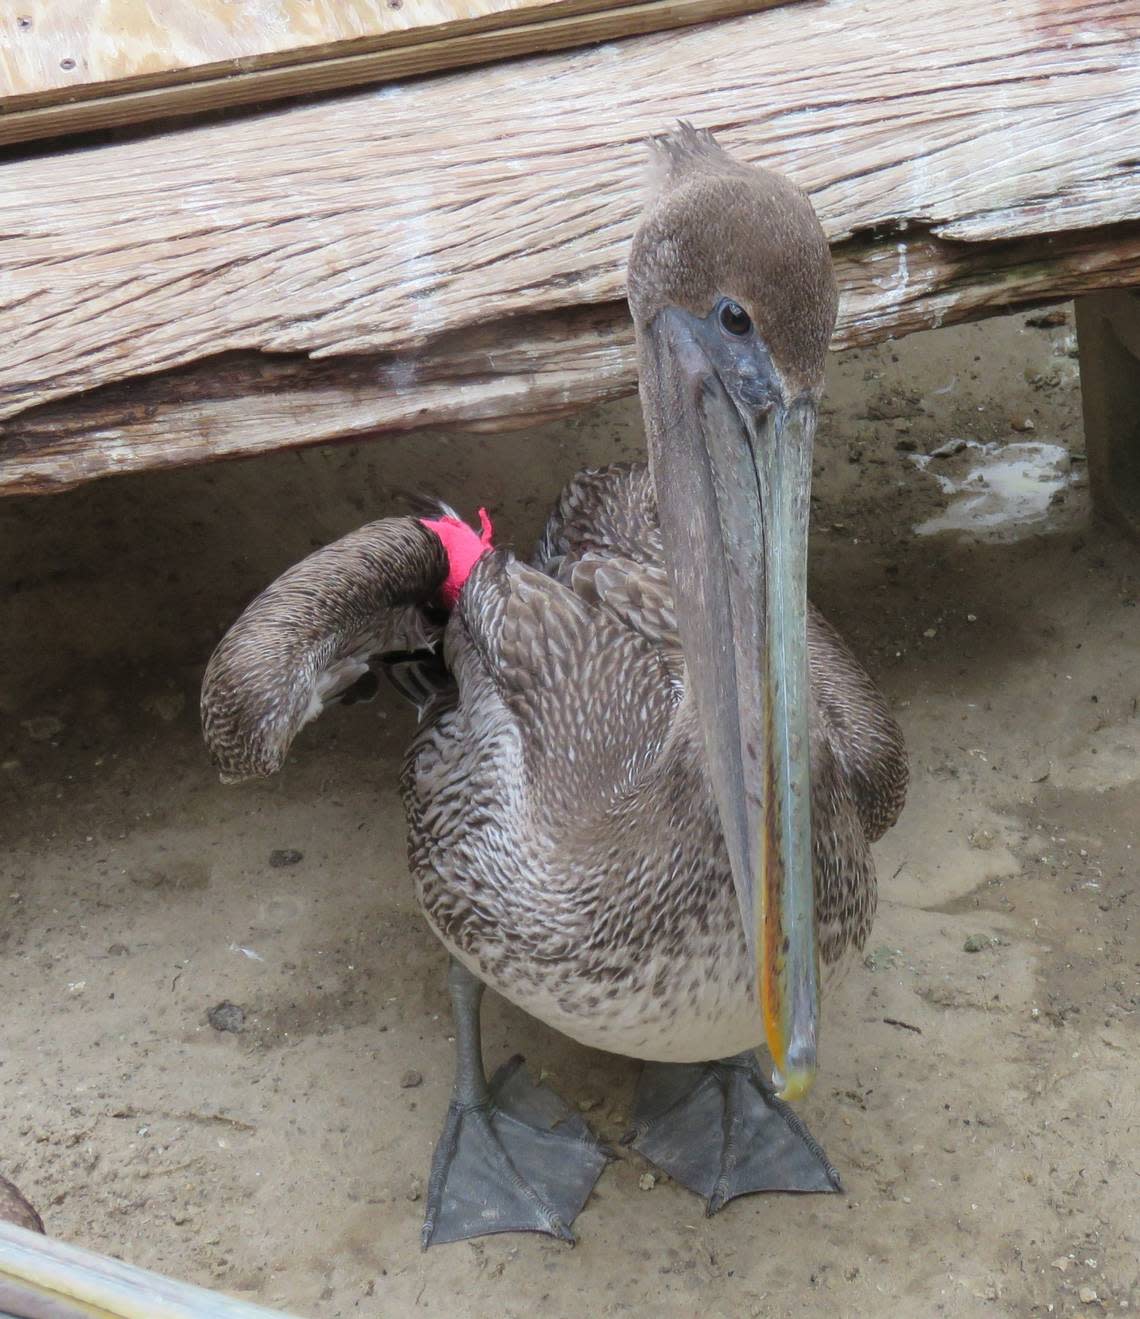 Wildlife shelter operator Mary Ellen Rogers has bandaged the wings of several brown pelicans found on N.C. beaches since January, but doesn’t expect them to survive. More than three dozen have been found dead or injured.